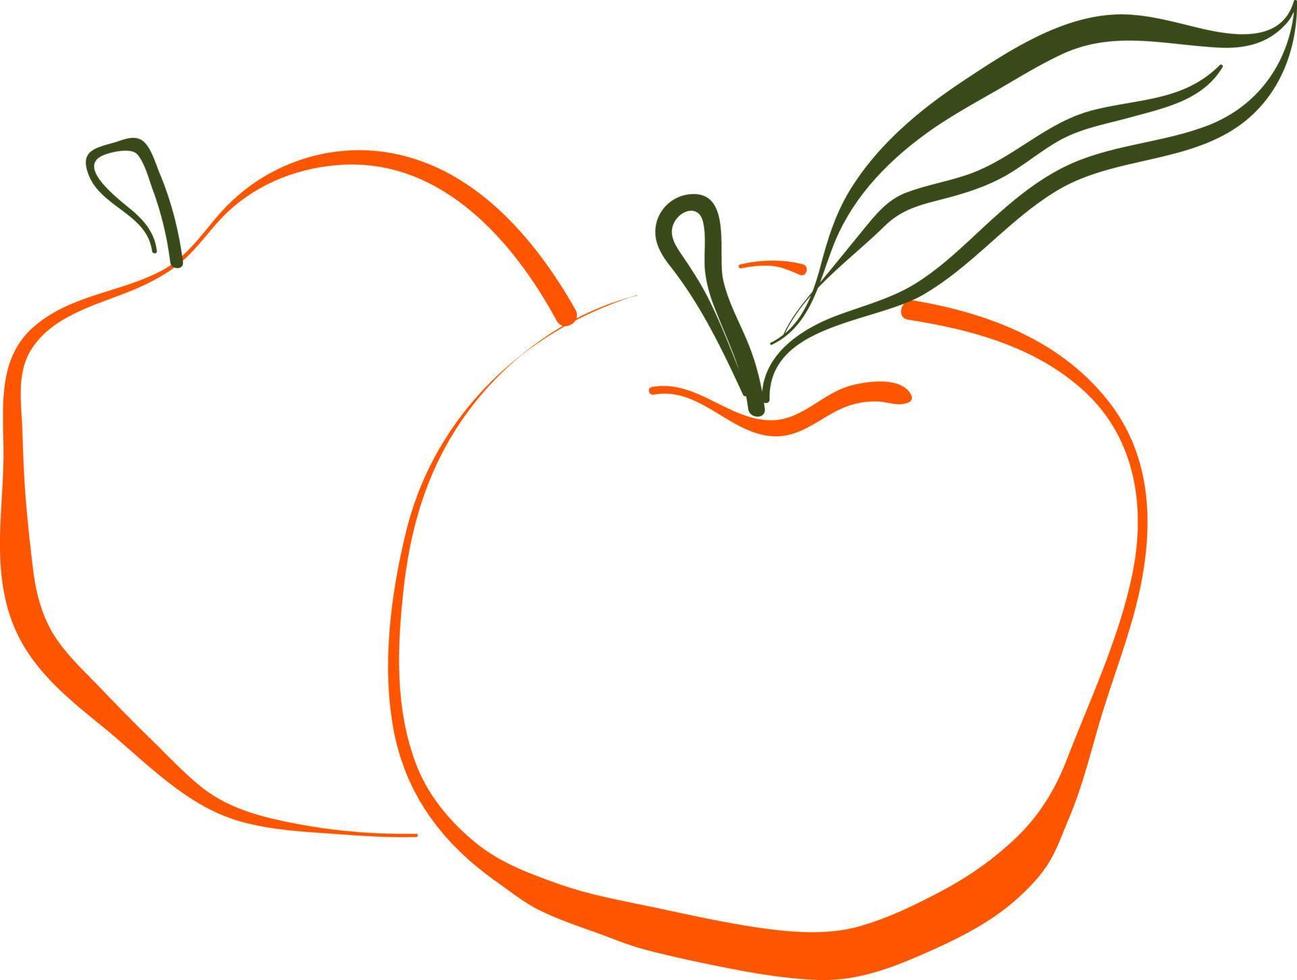 Apple drawing, illustration, vector on white background.